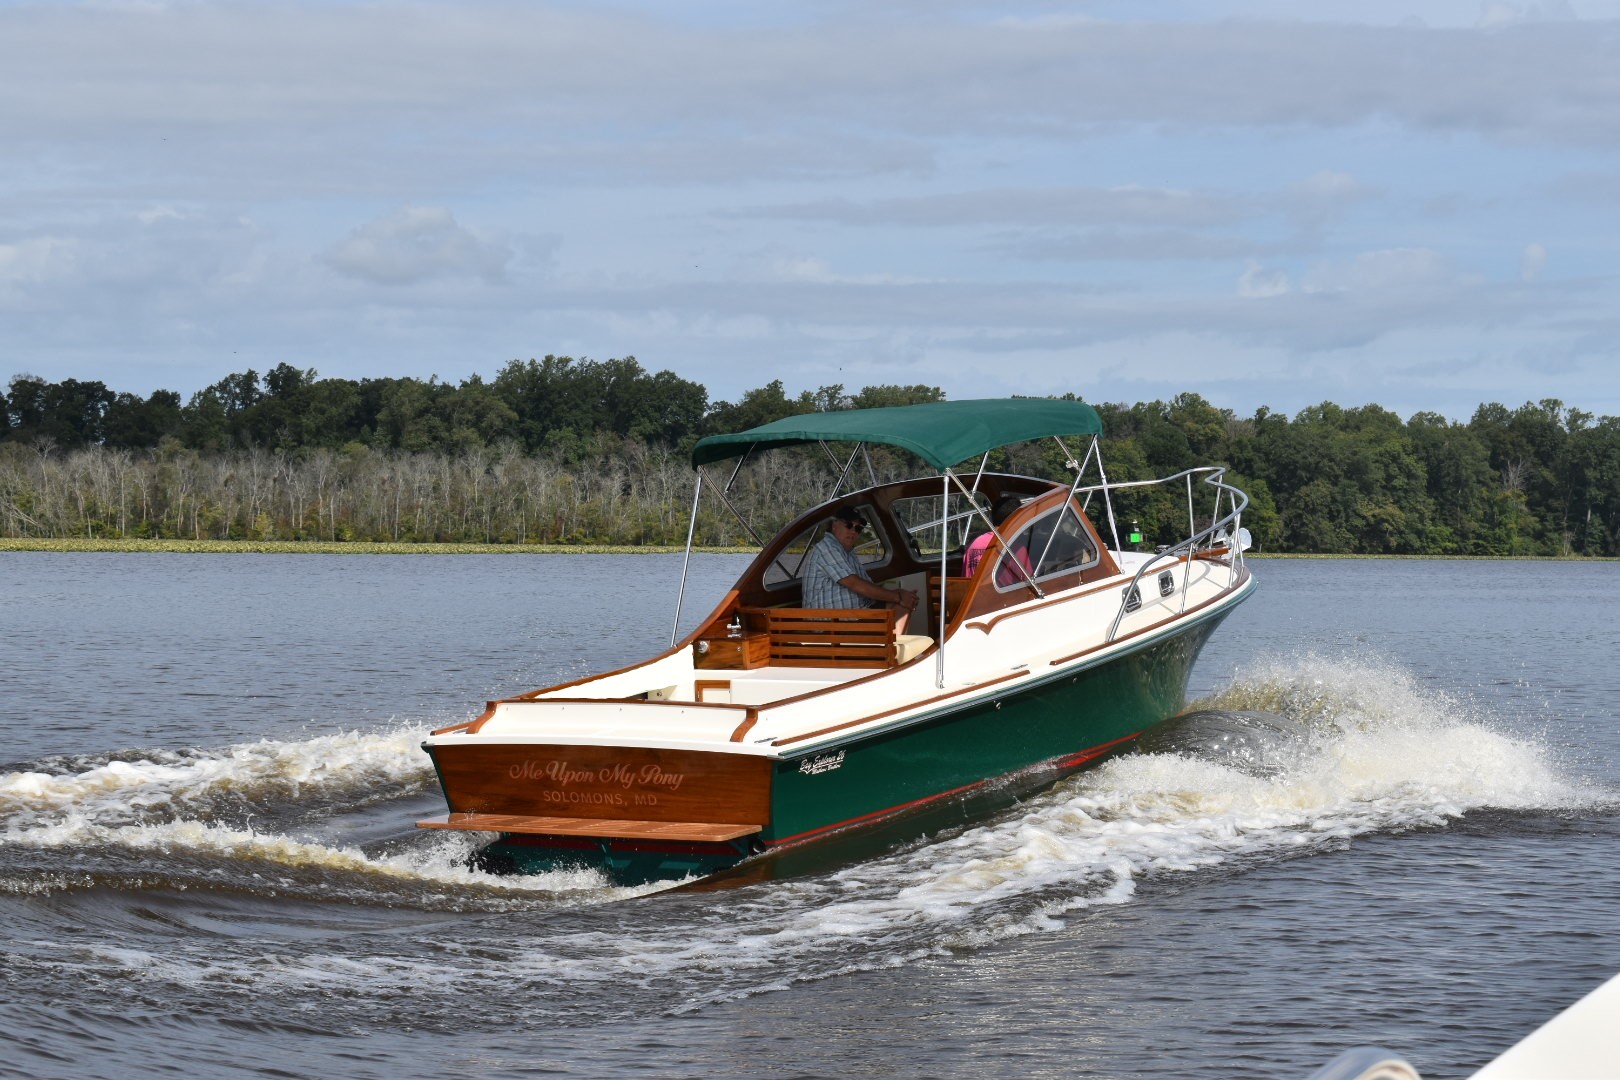 A green boat with a cockpit seating